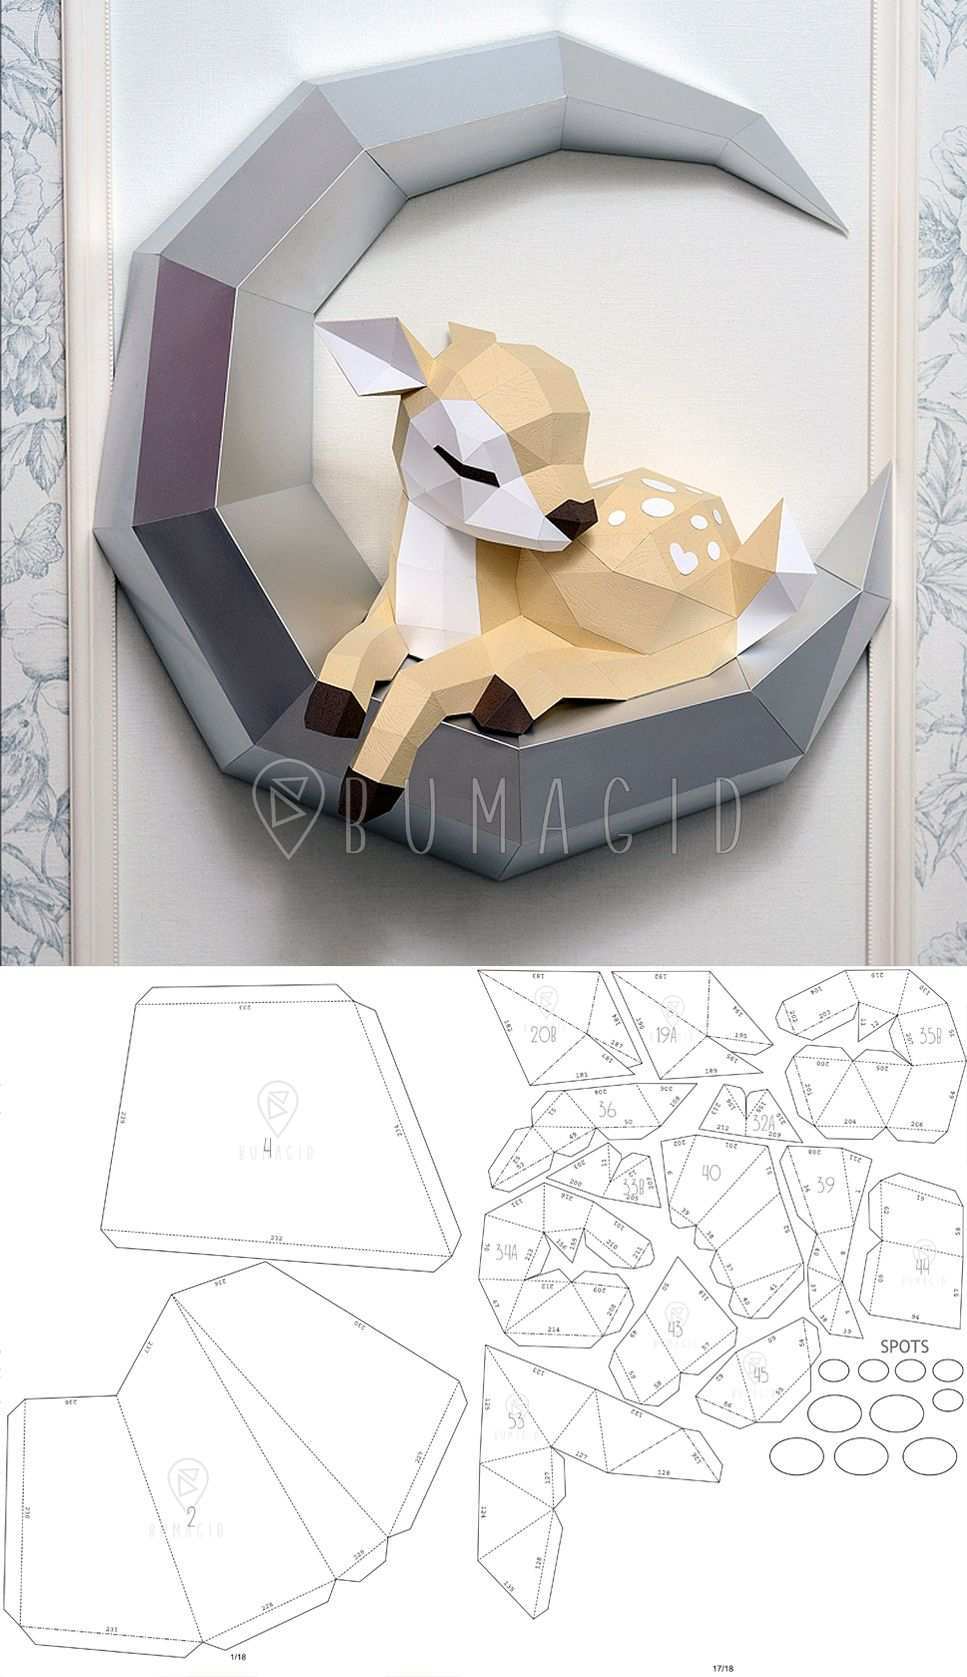 Pdf Template Fawn On The Moon Low Poly Fawn Model Origami Etsy Paper Crafts Origami 3d Paper Crafts Paper Crafts Diy